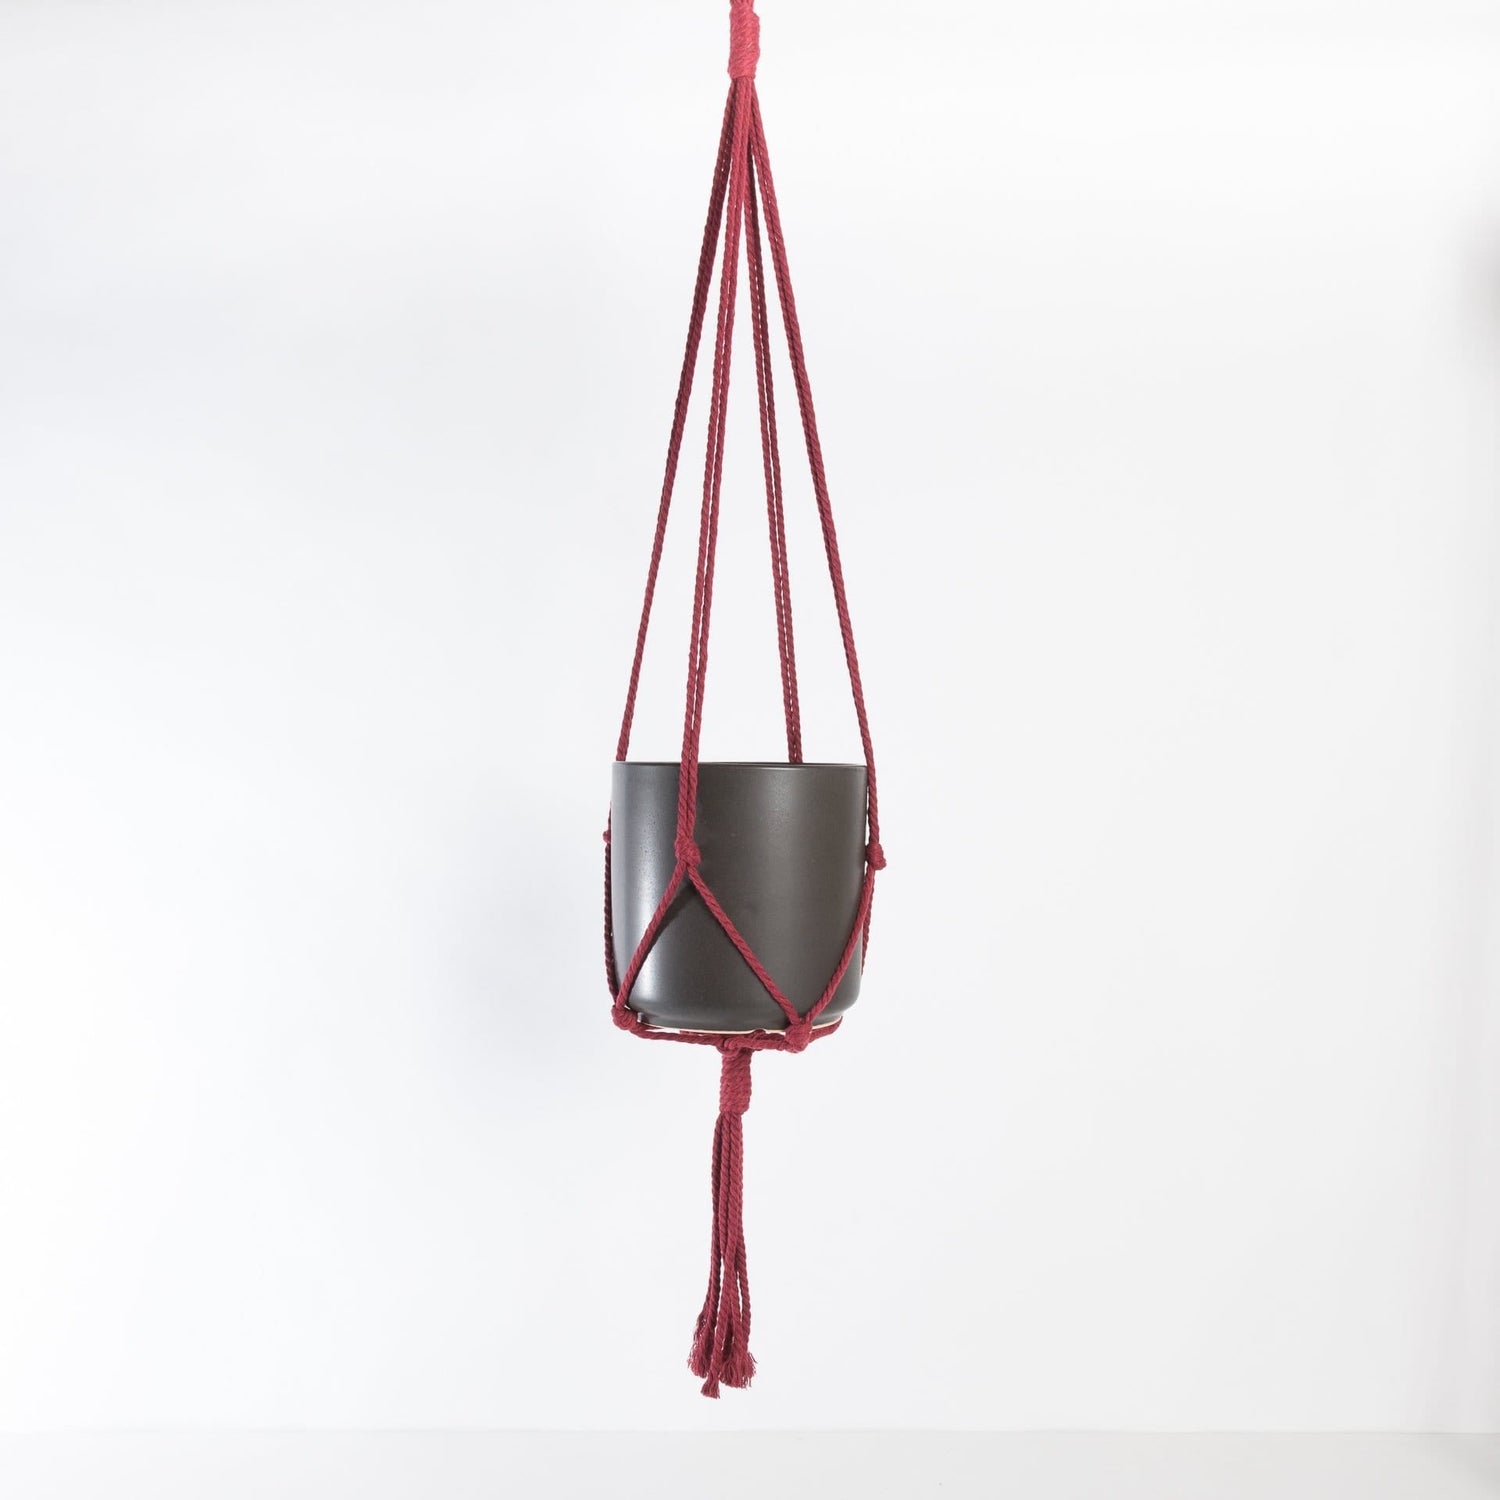 Kytras Keepers Hanger 36" Wine Red Minimalist Cotton Macrame Plant Hanger